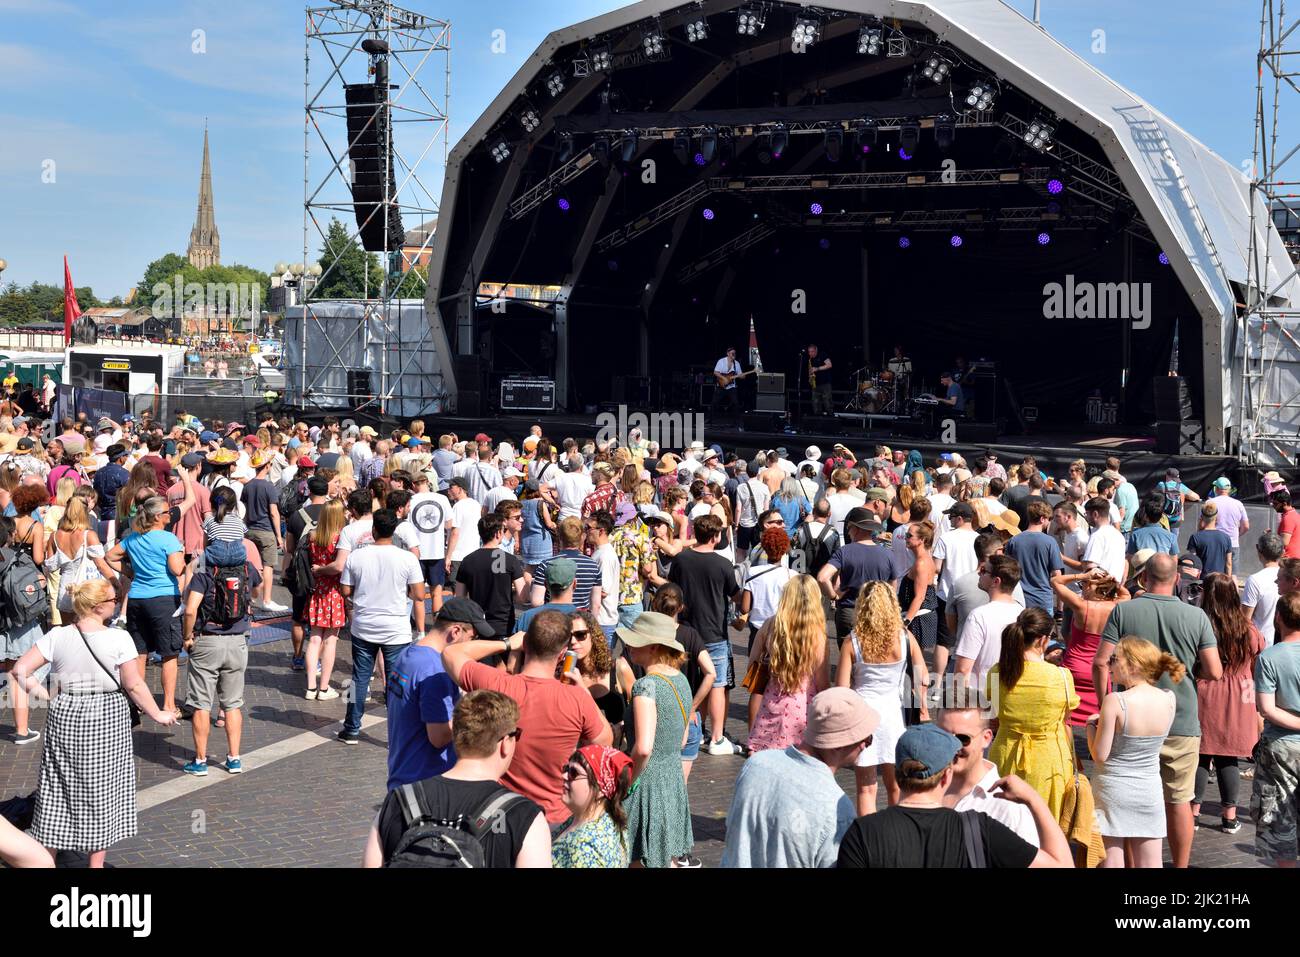 Crowd in front of stage at Bristol Amphitheatre & Waterfront Square during harbour festival, UK Stock Photo